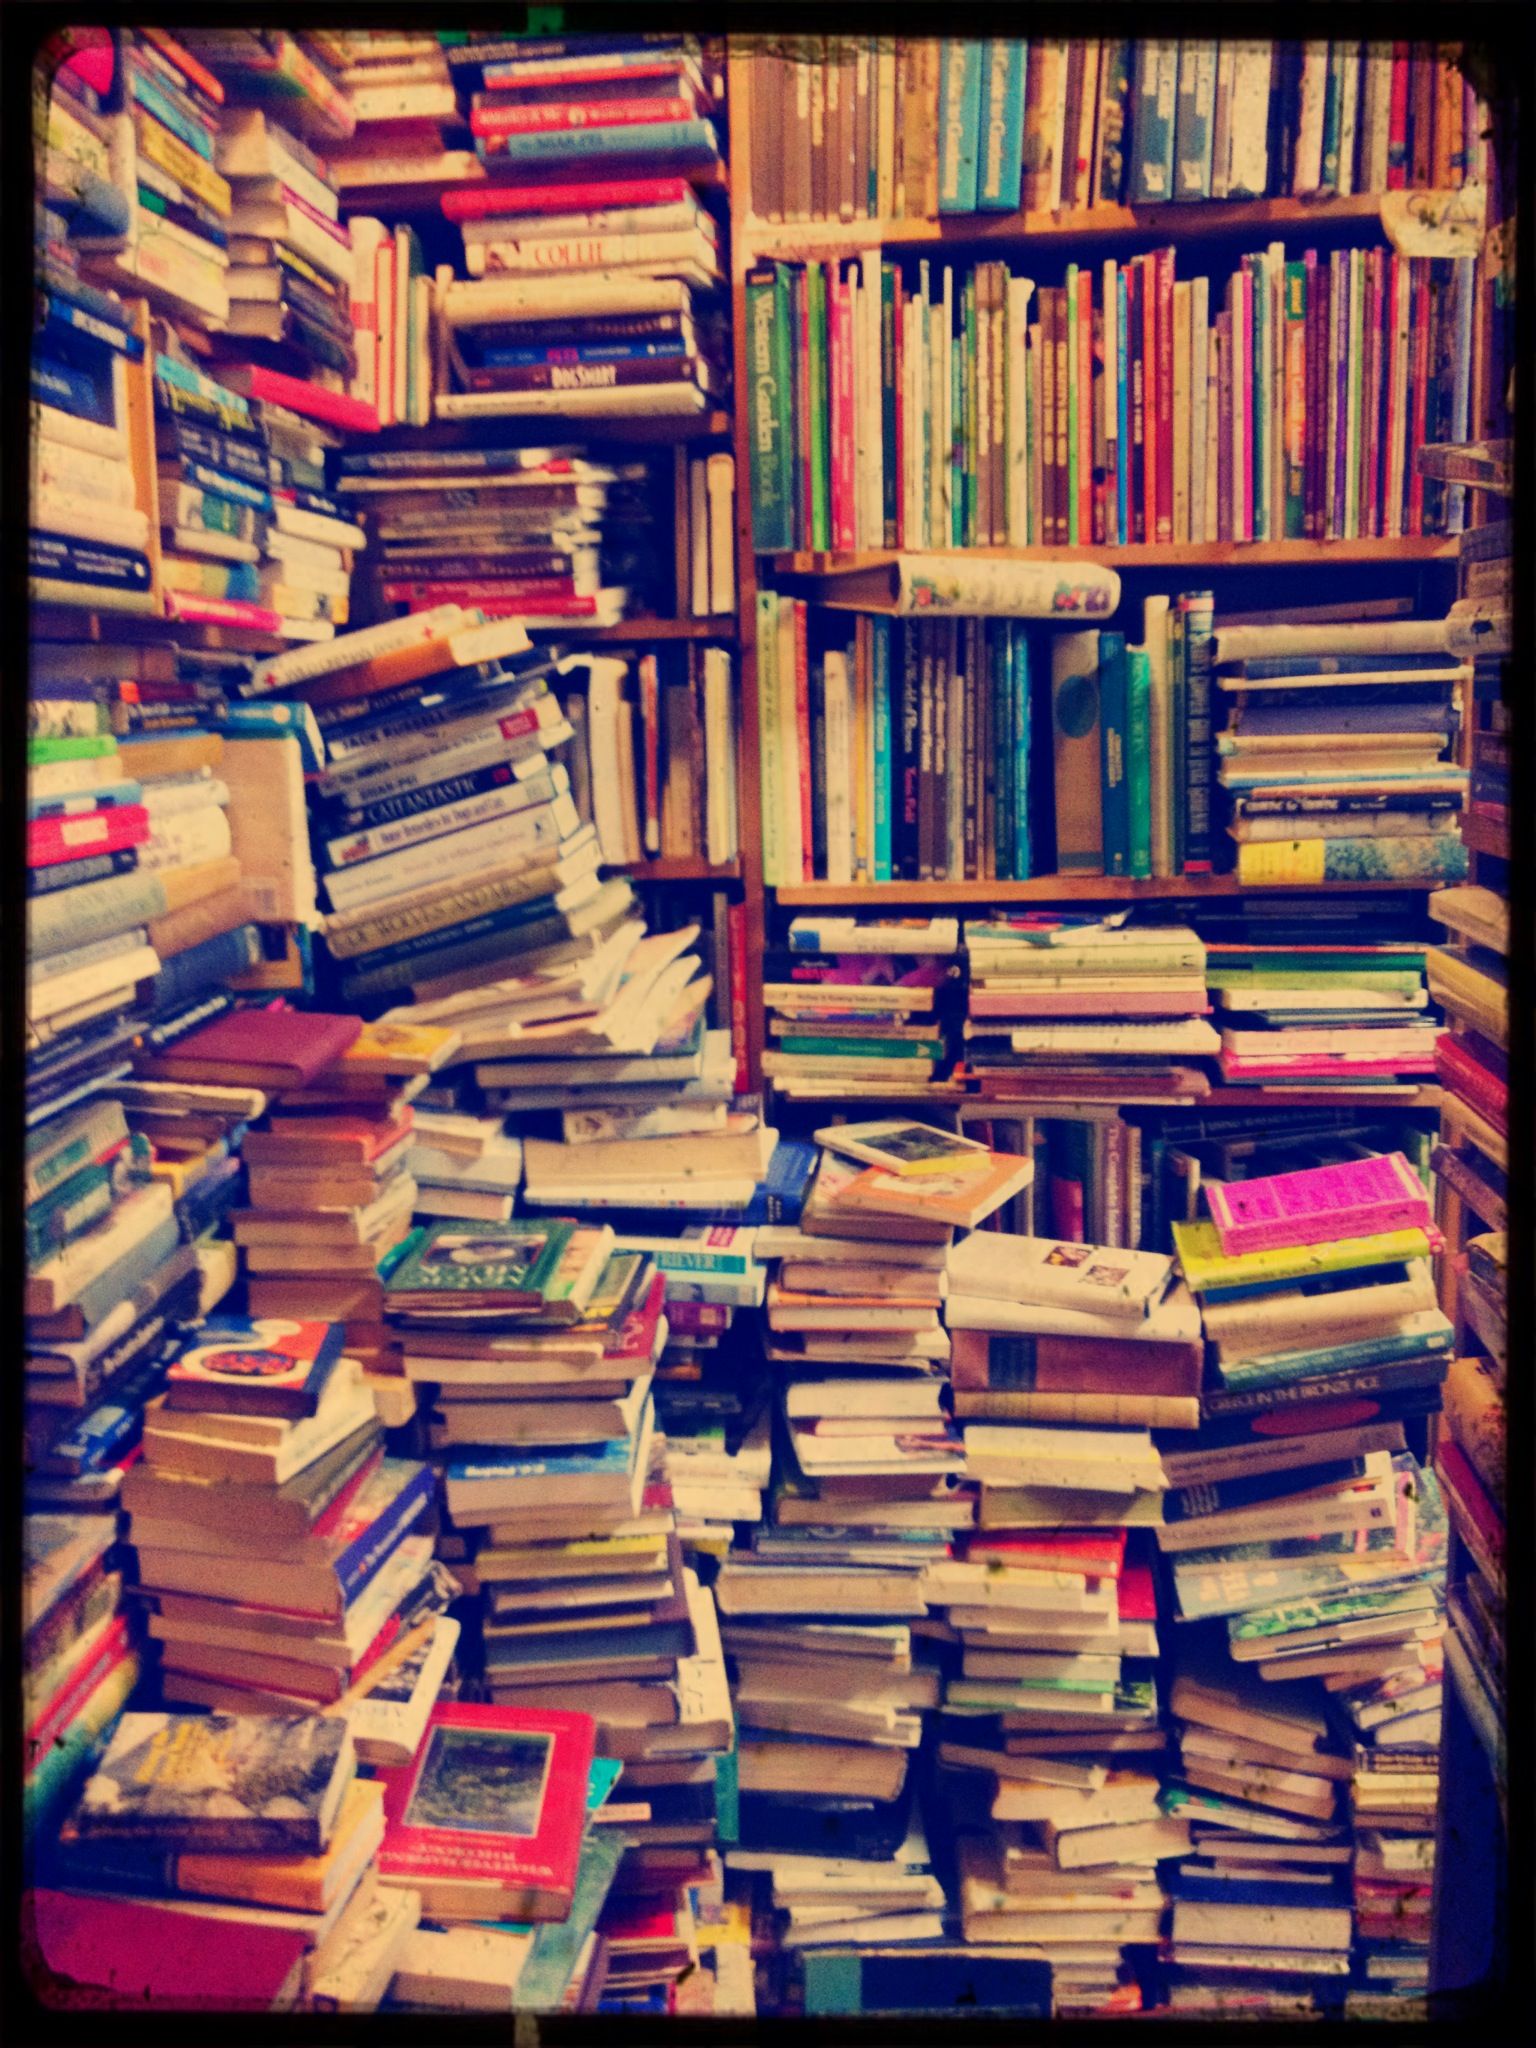 My room looks like this-- stacks and stacks of books! Pickwick ...